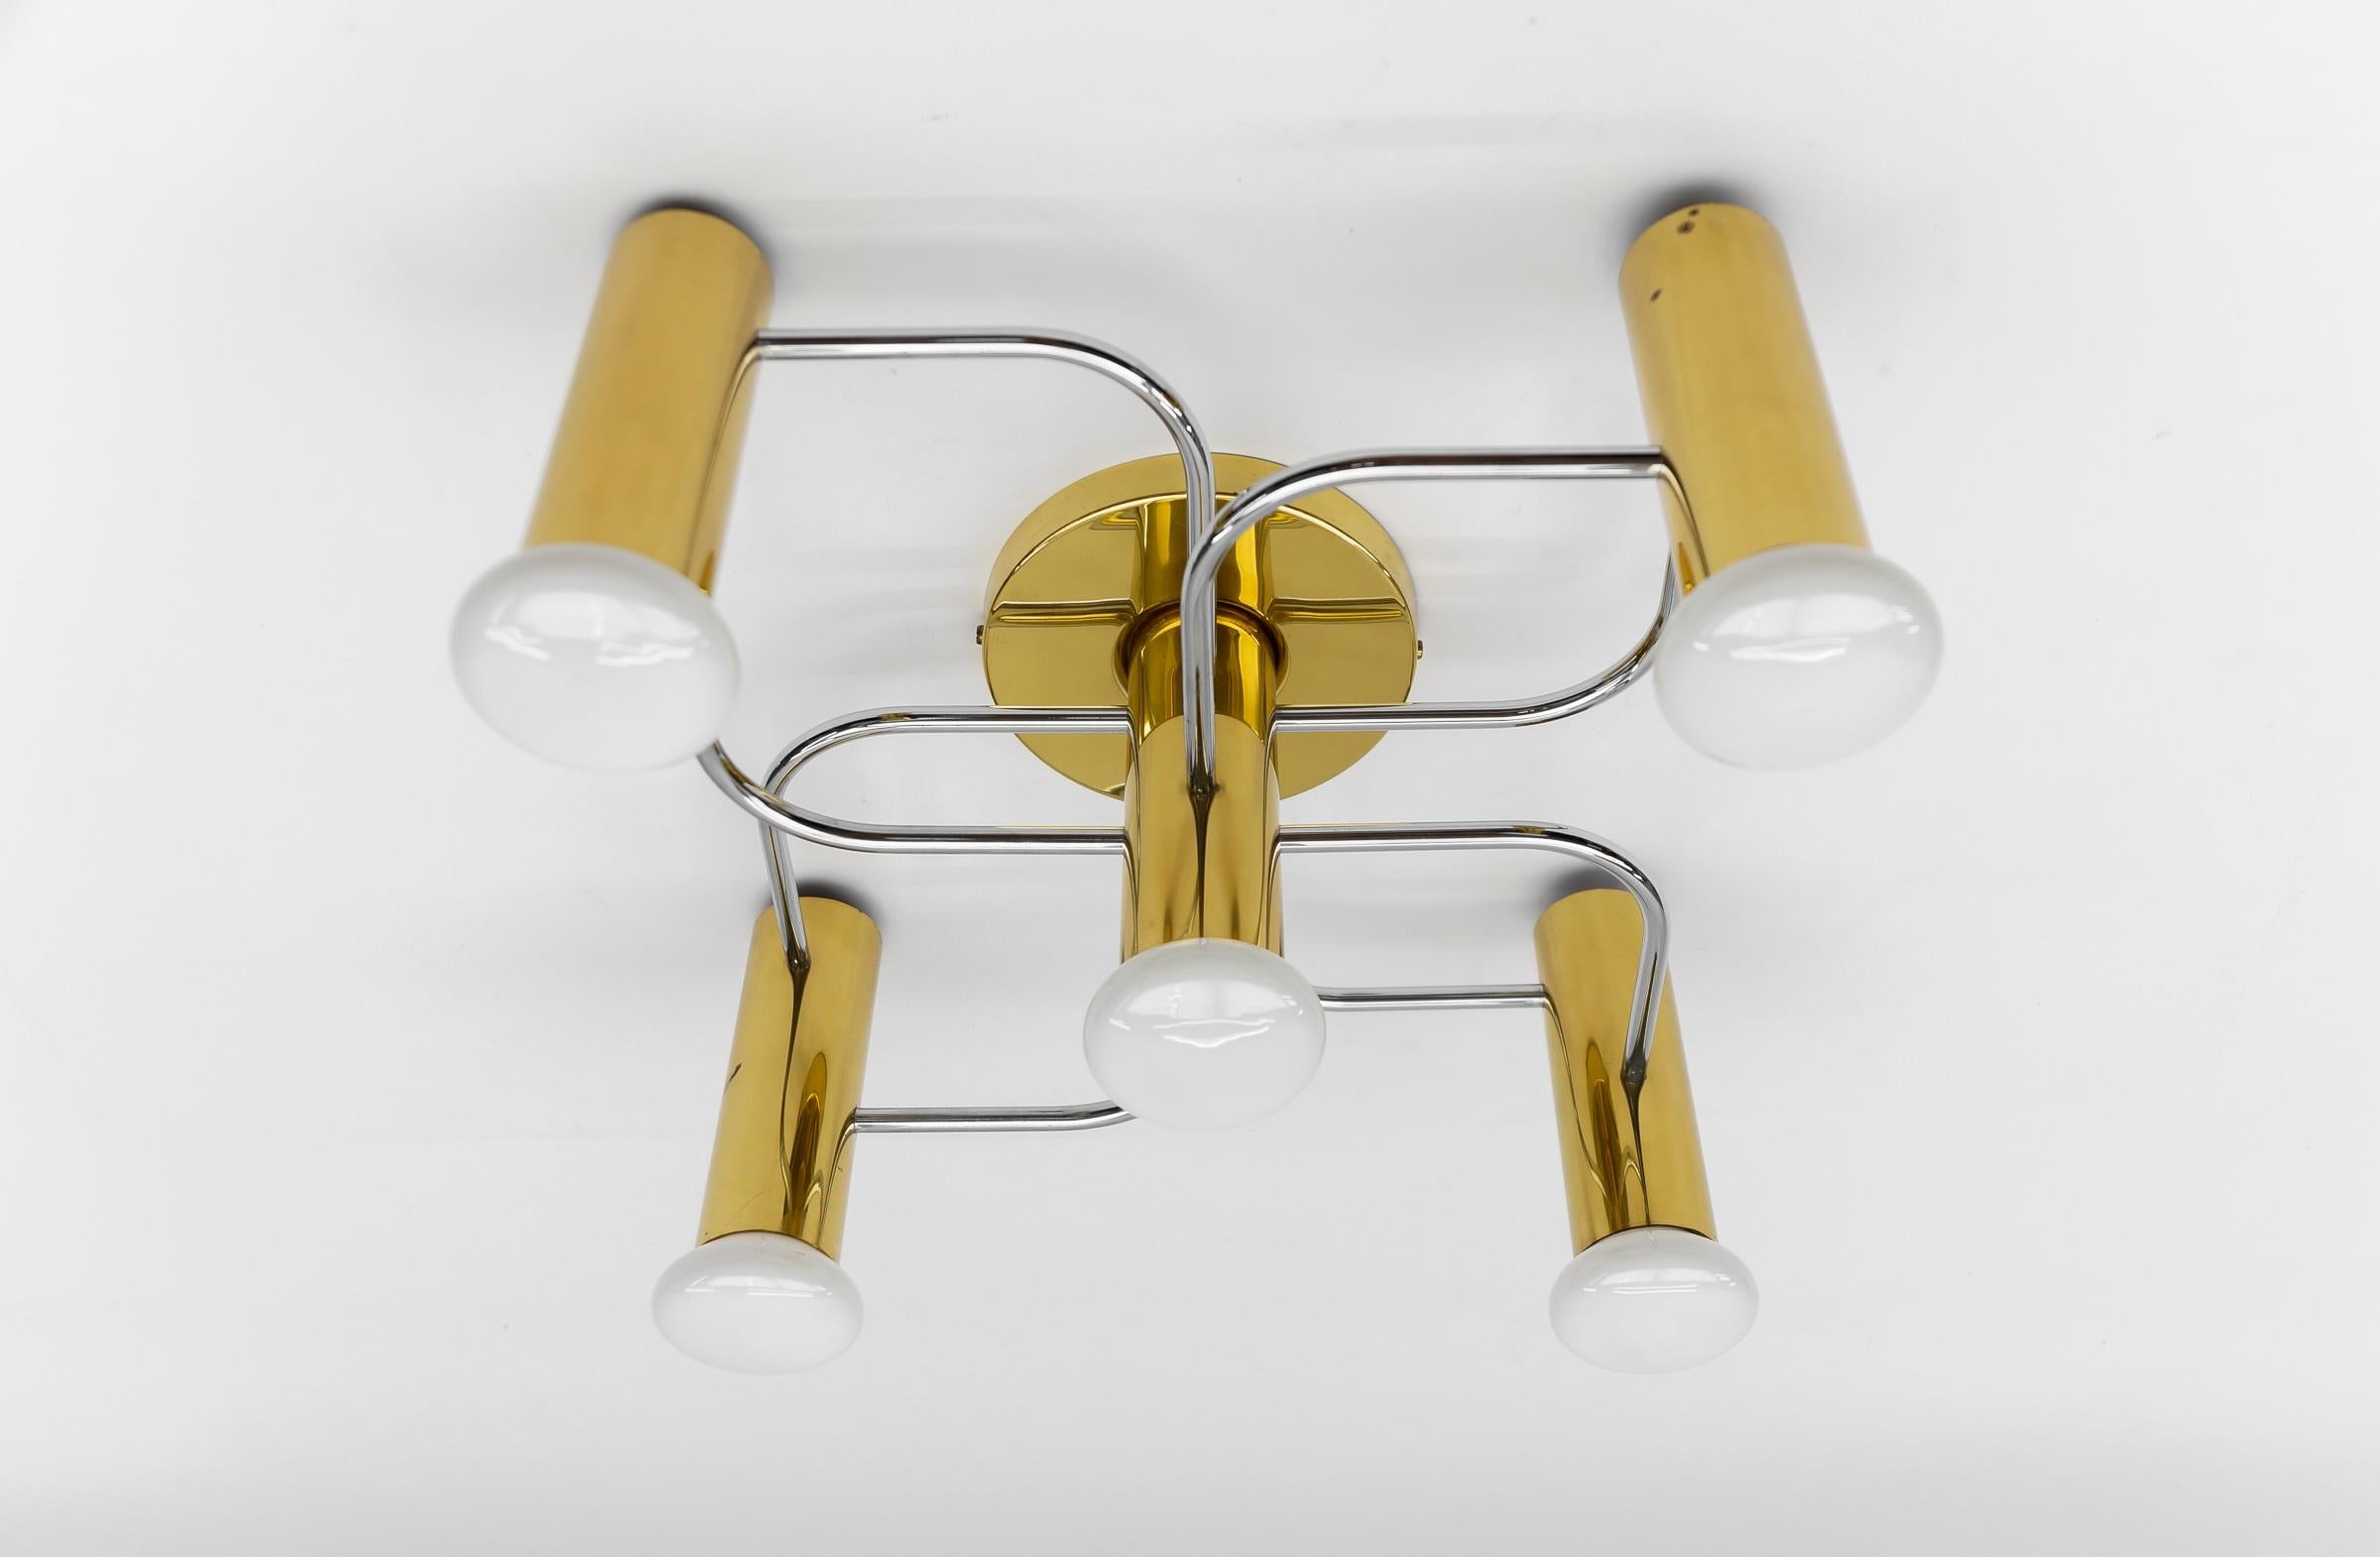 Sculptural Silber / Gold Wall Light Flush Mount by Leola, 1970s Germany

Dimensions:
Height: 6.19 in ( 16 cm )
Width: 17.72 in ( 45 cm )
Depth: 17.72 in ( 45 cm )


The fixture need 1 x E27 standard bulb with 60W max.

Light bulbs are not